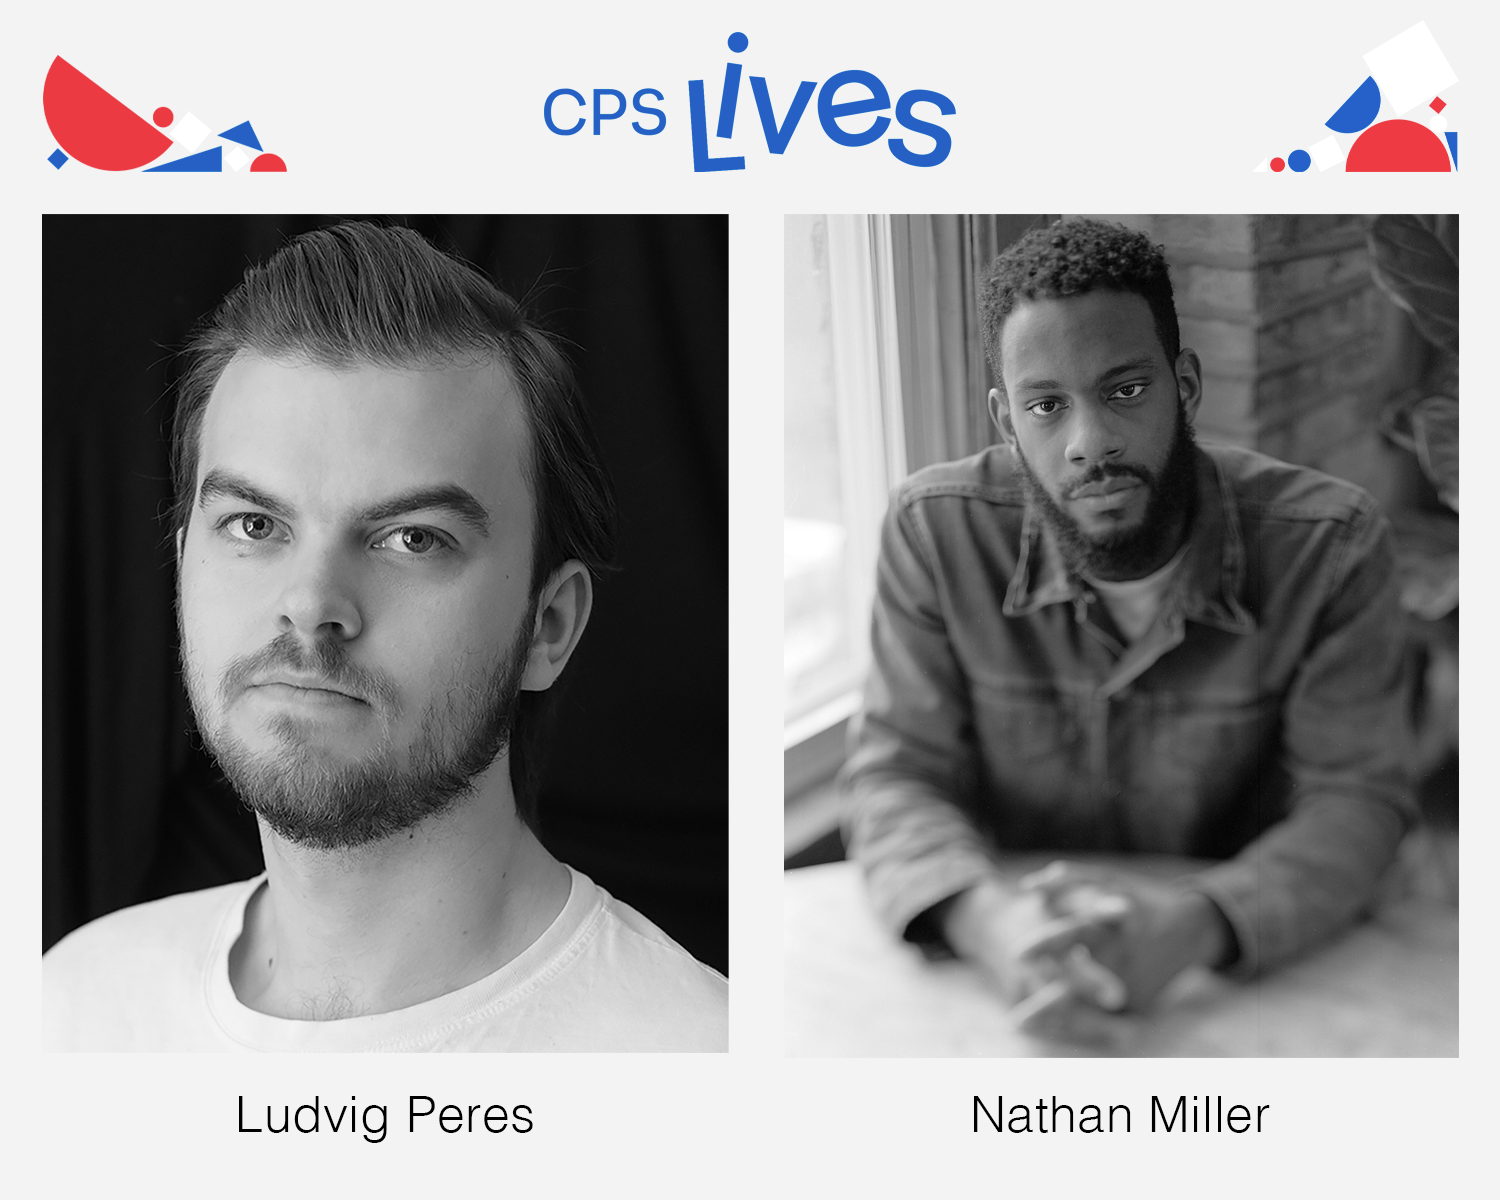 nathan miller, ludvig peres, chicago, cps lives, artist residency, cps, chicago public schools